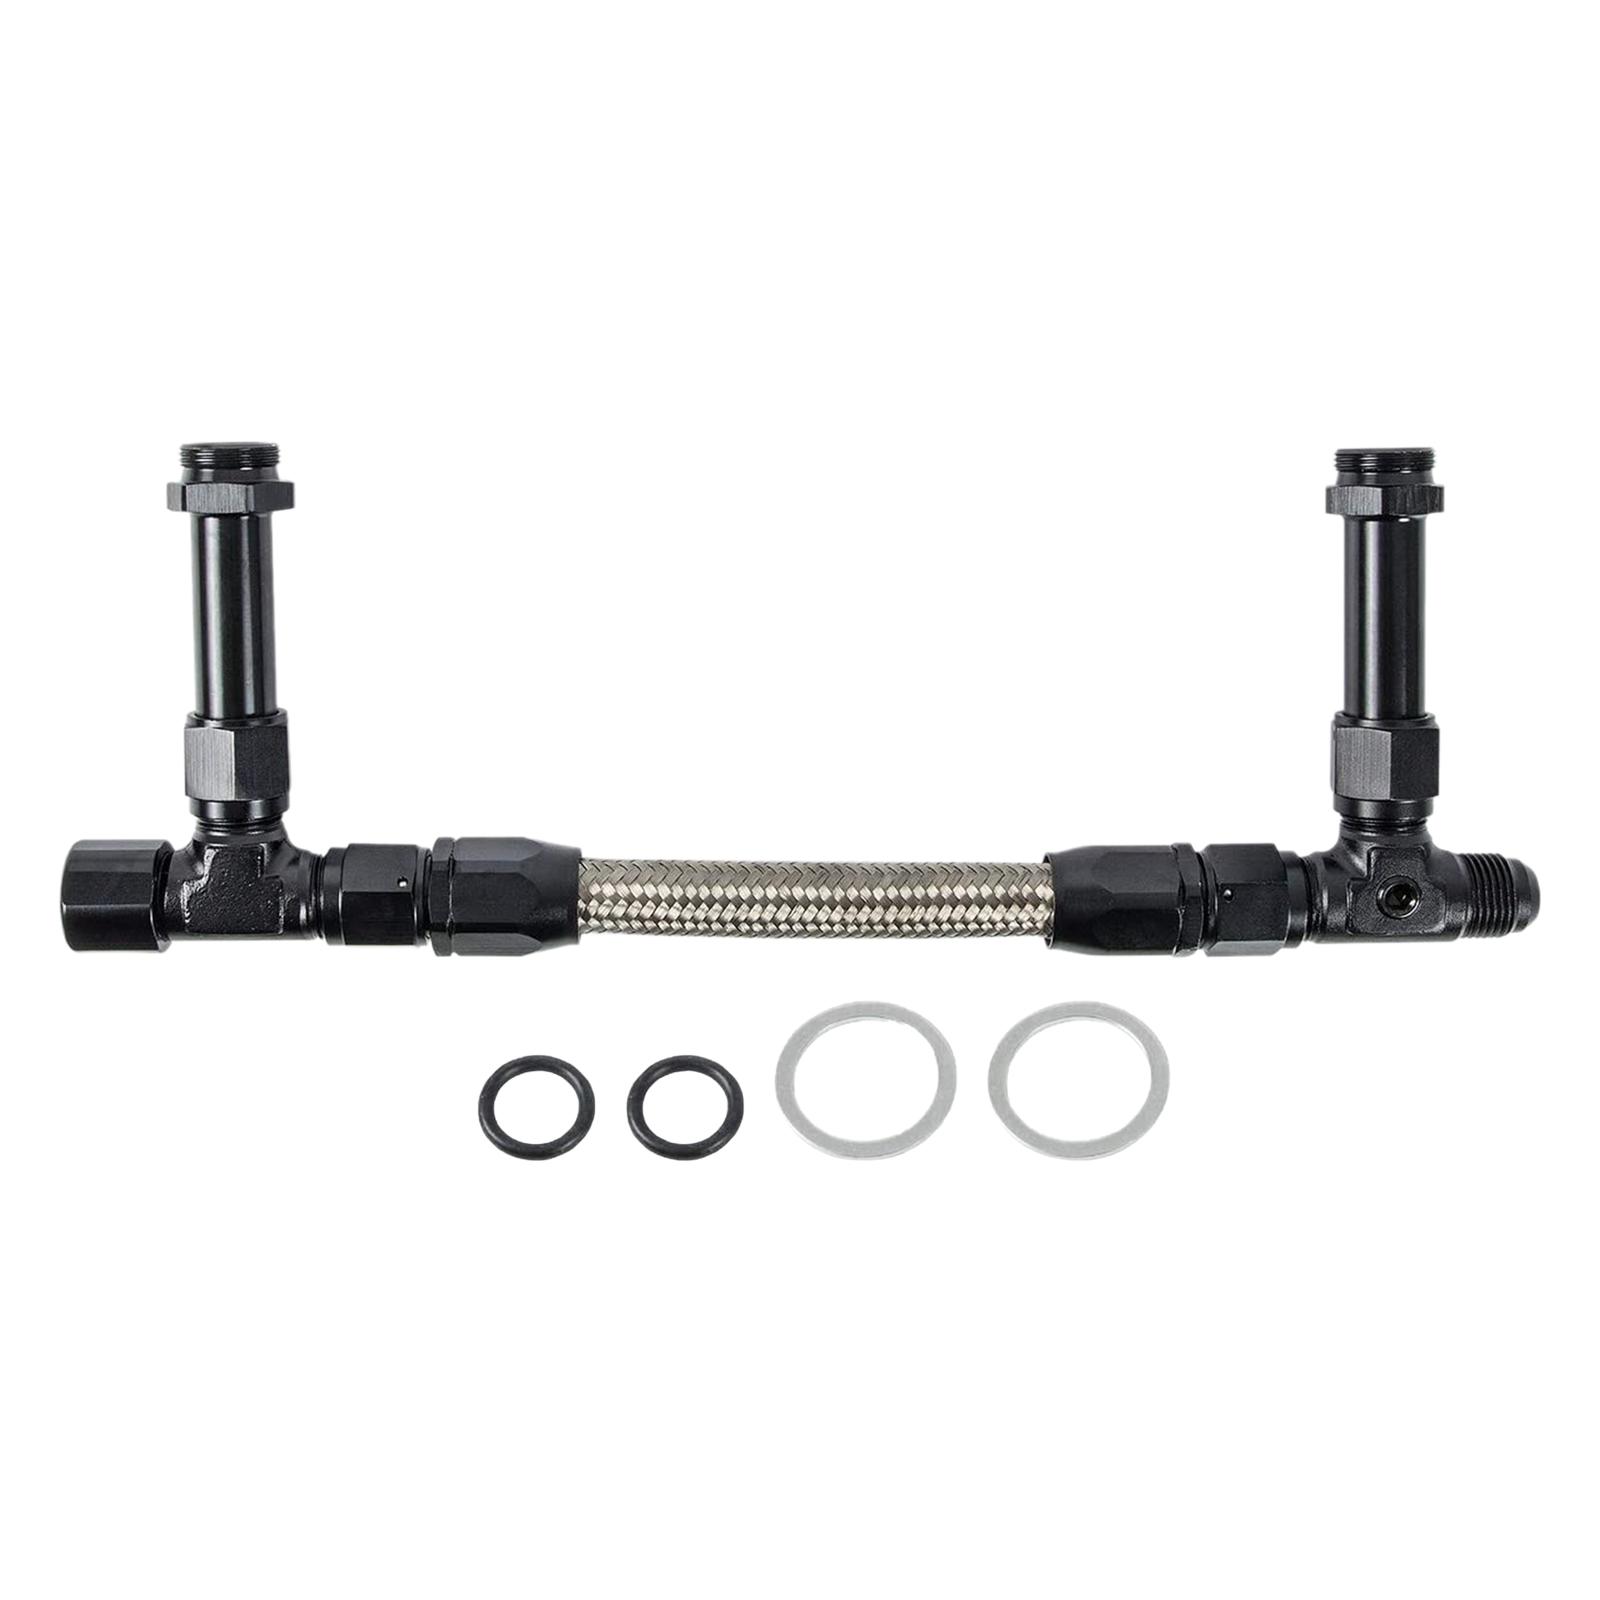 Dual feed Fuel Line for 4150 Premium Replaces Durable Universal for Aed Black